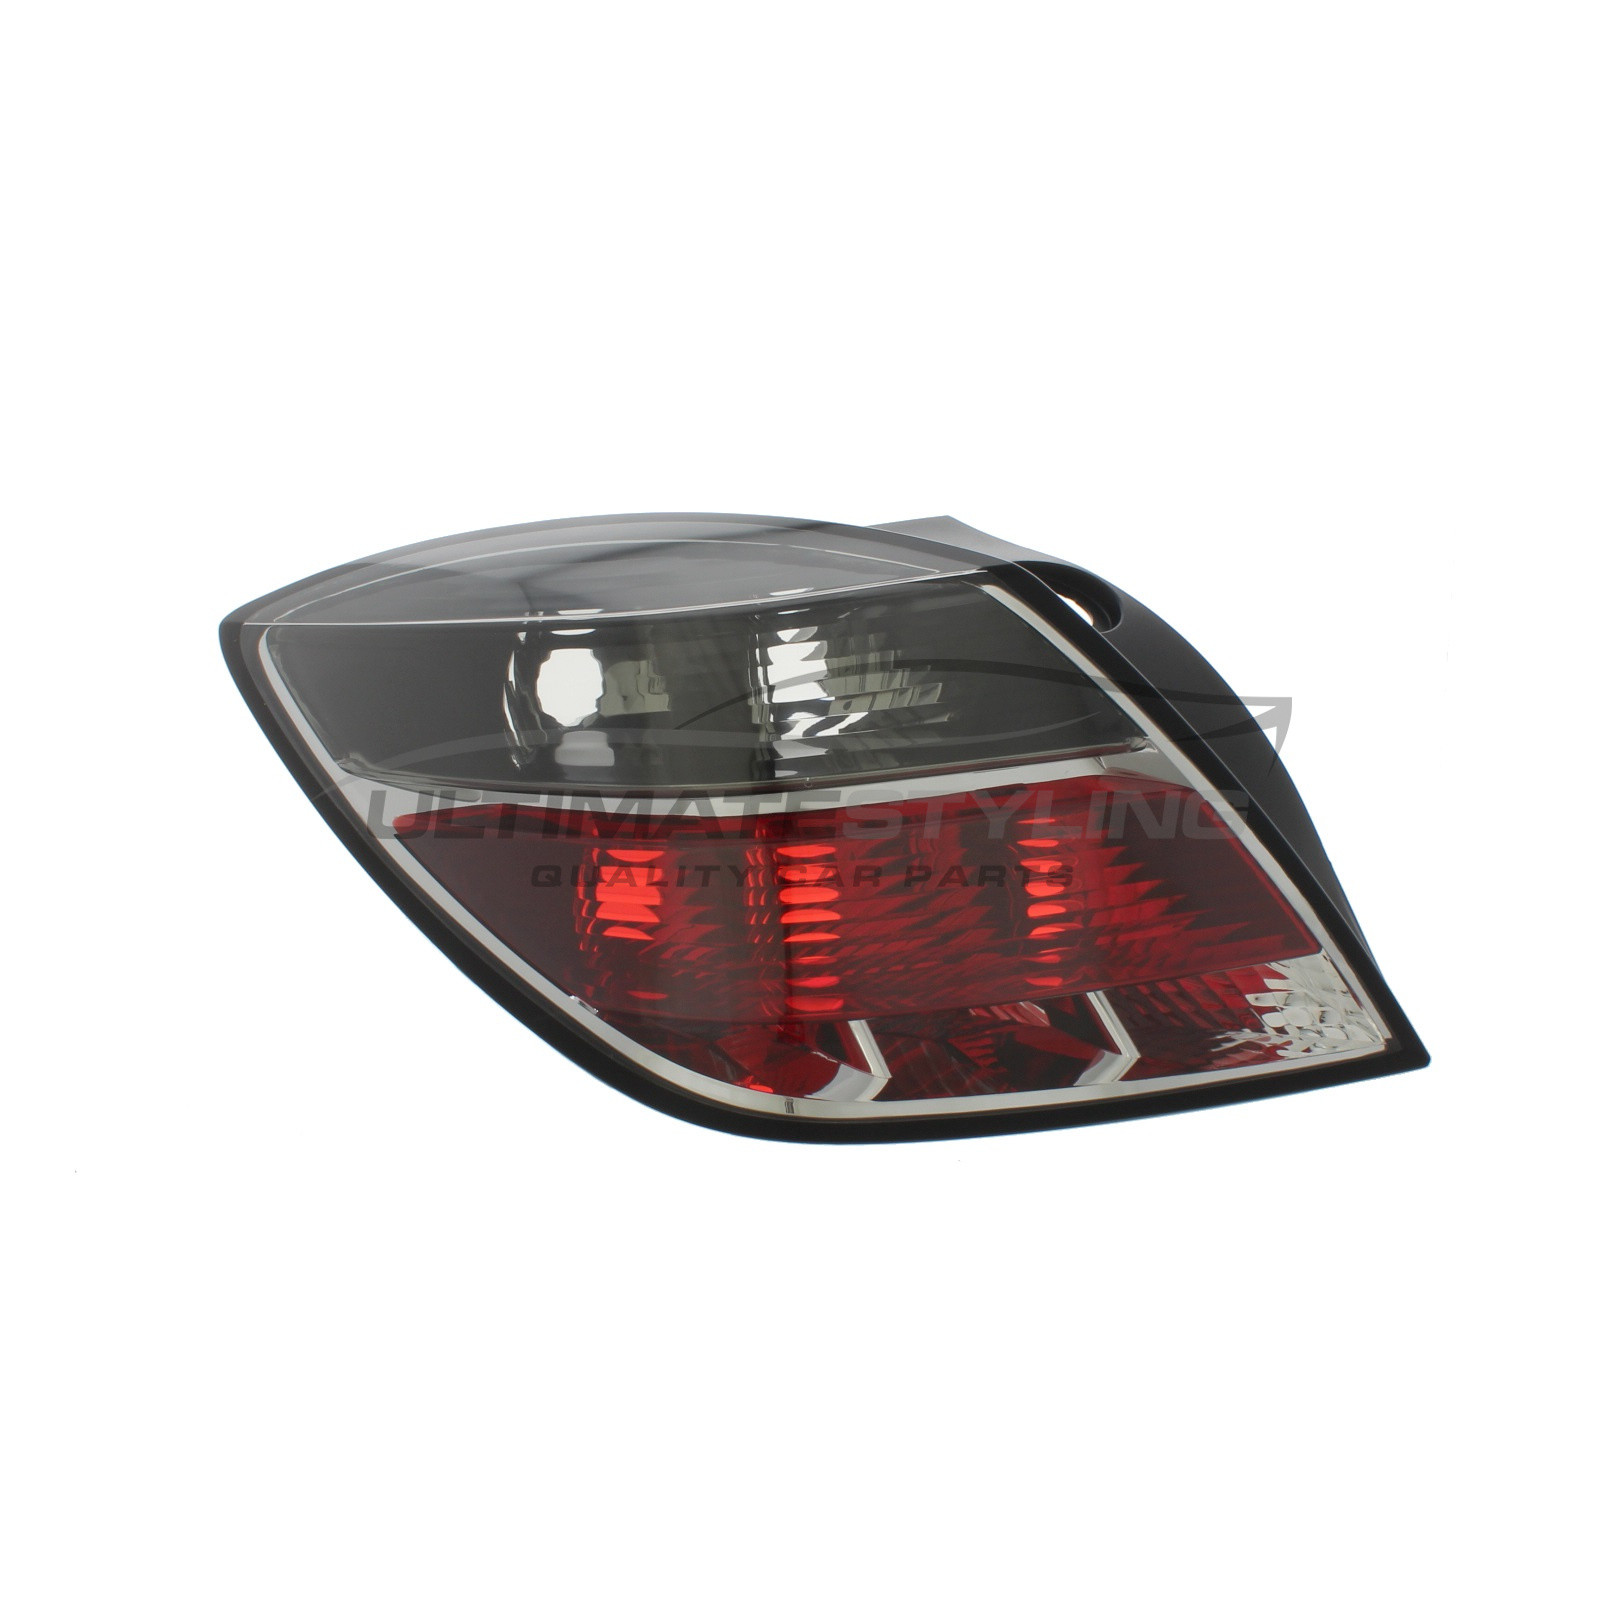 Vauxhall Astra 2004-2011 Non-LED with Smoked Indicator Rear Light / Tail Light Excluding Bulb Holder Passenger Side (LH)